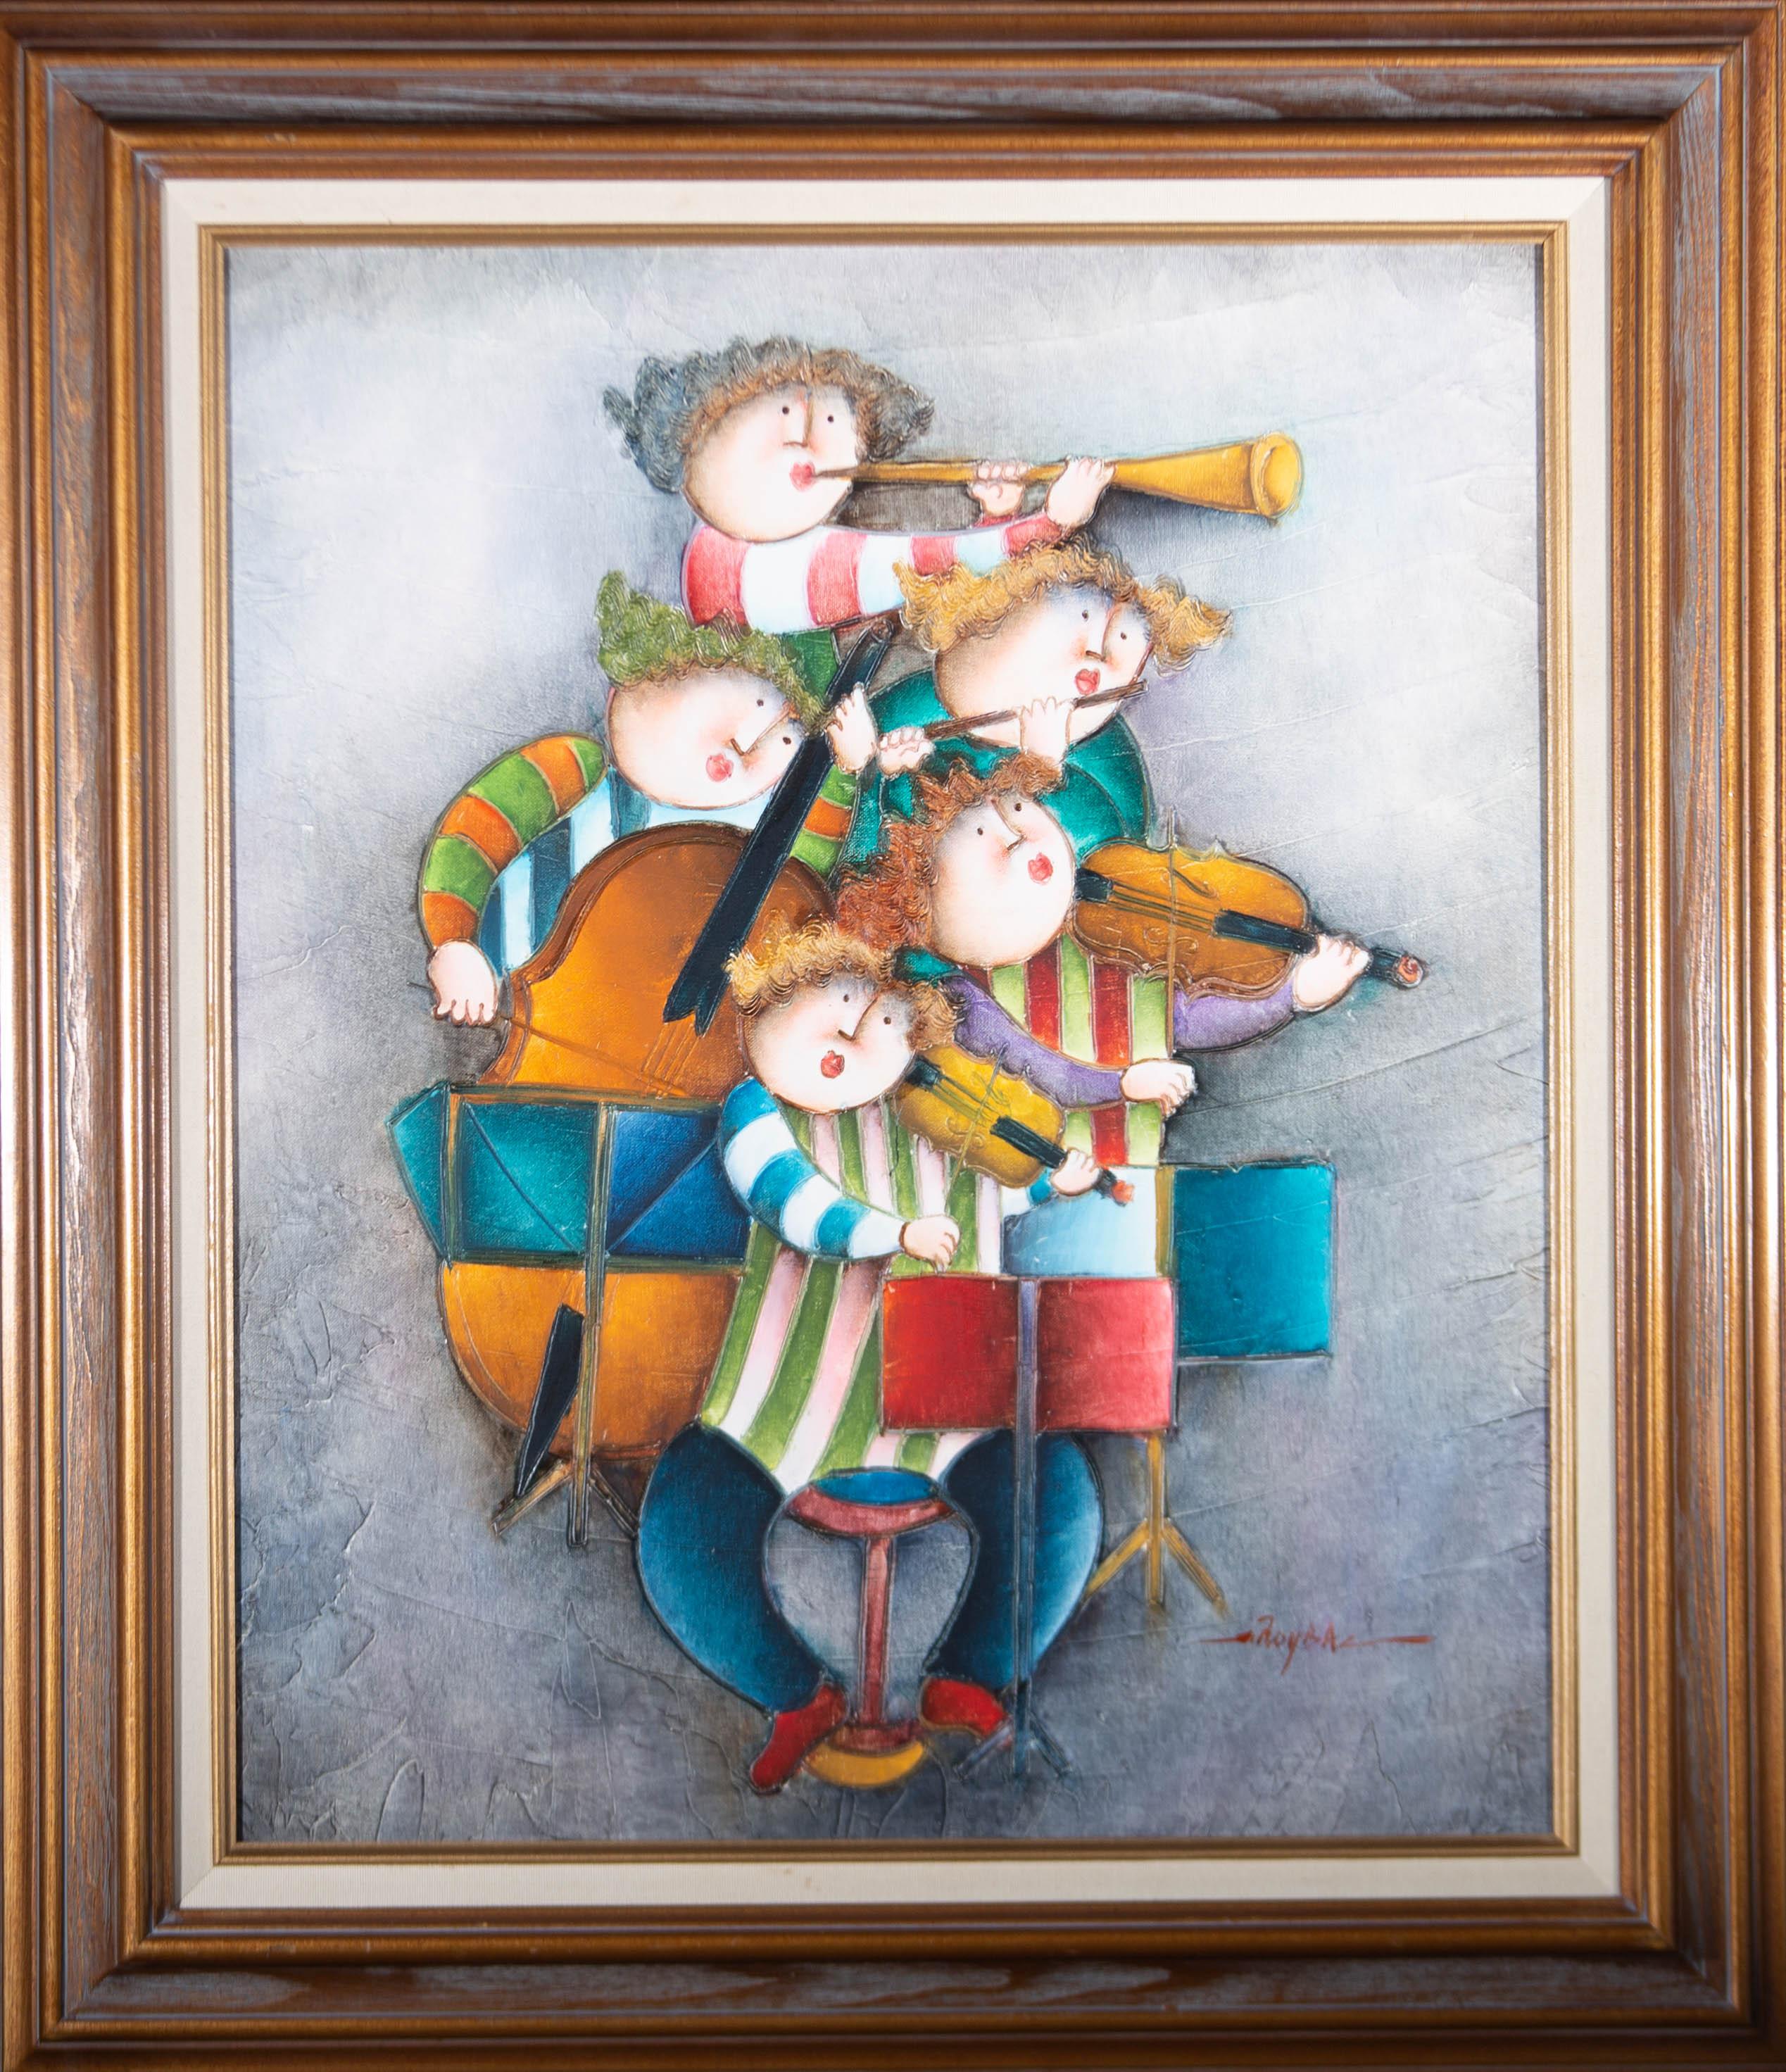 A vibrant, fun filled oil in a contemporary, naive style showing a quartet mid performance, wearing brightly striped clothing. The painting has been signed in the lower right corner and presented in a substantial, contemporary wood frame with linen